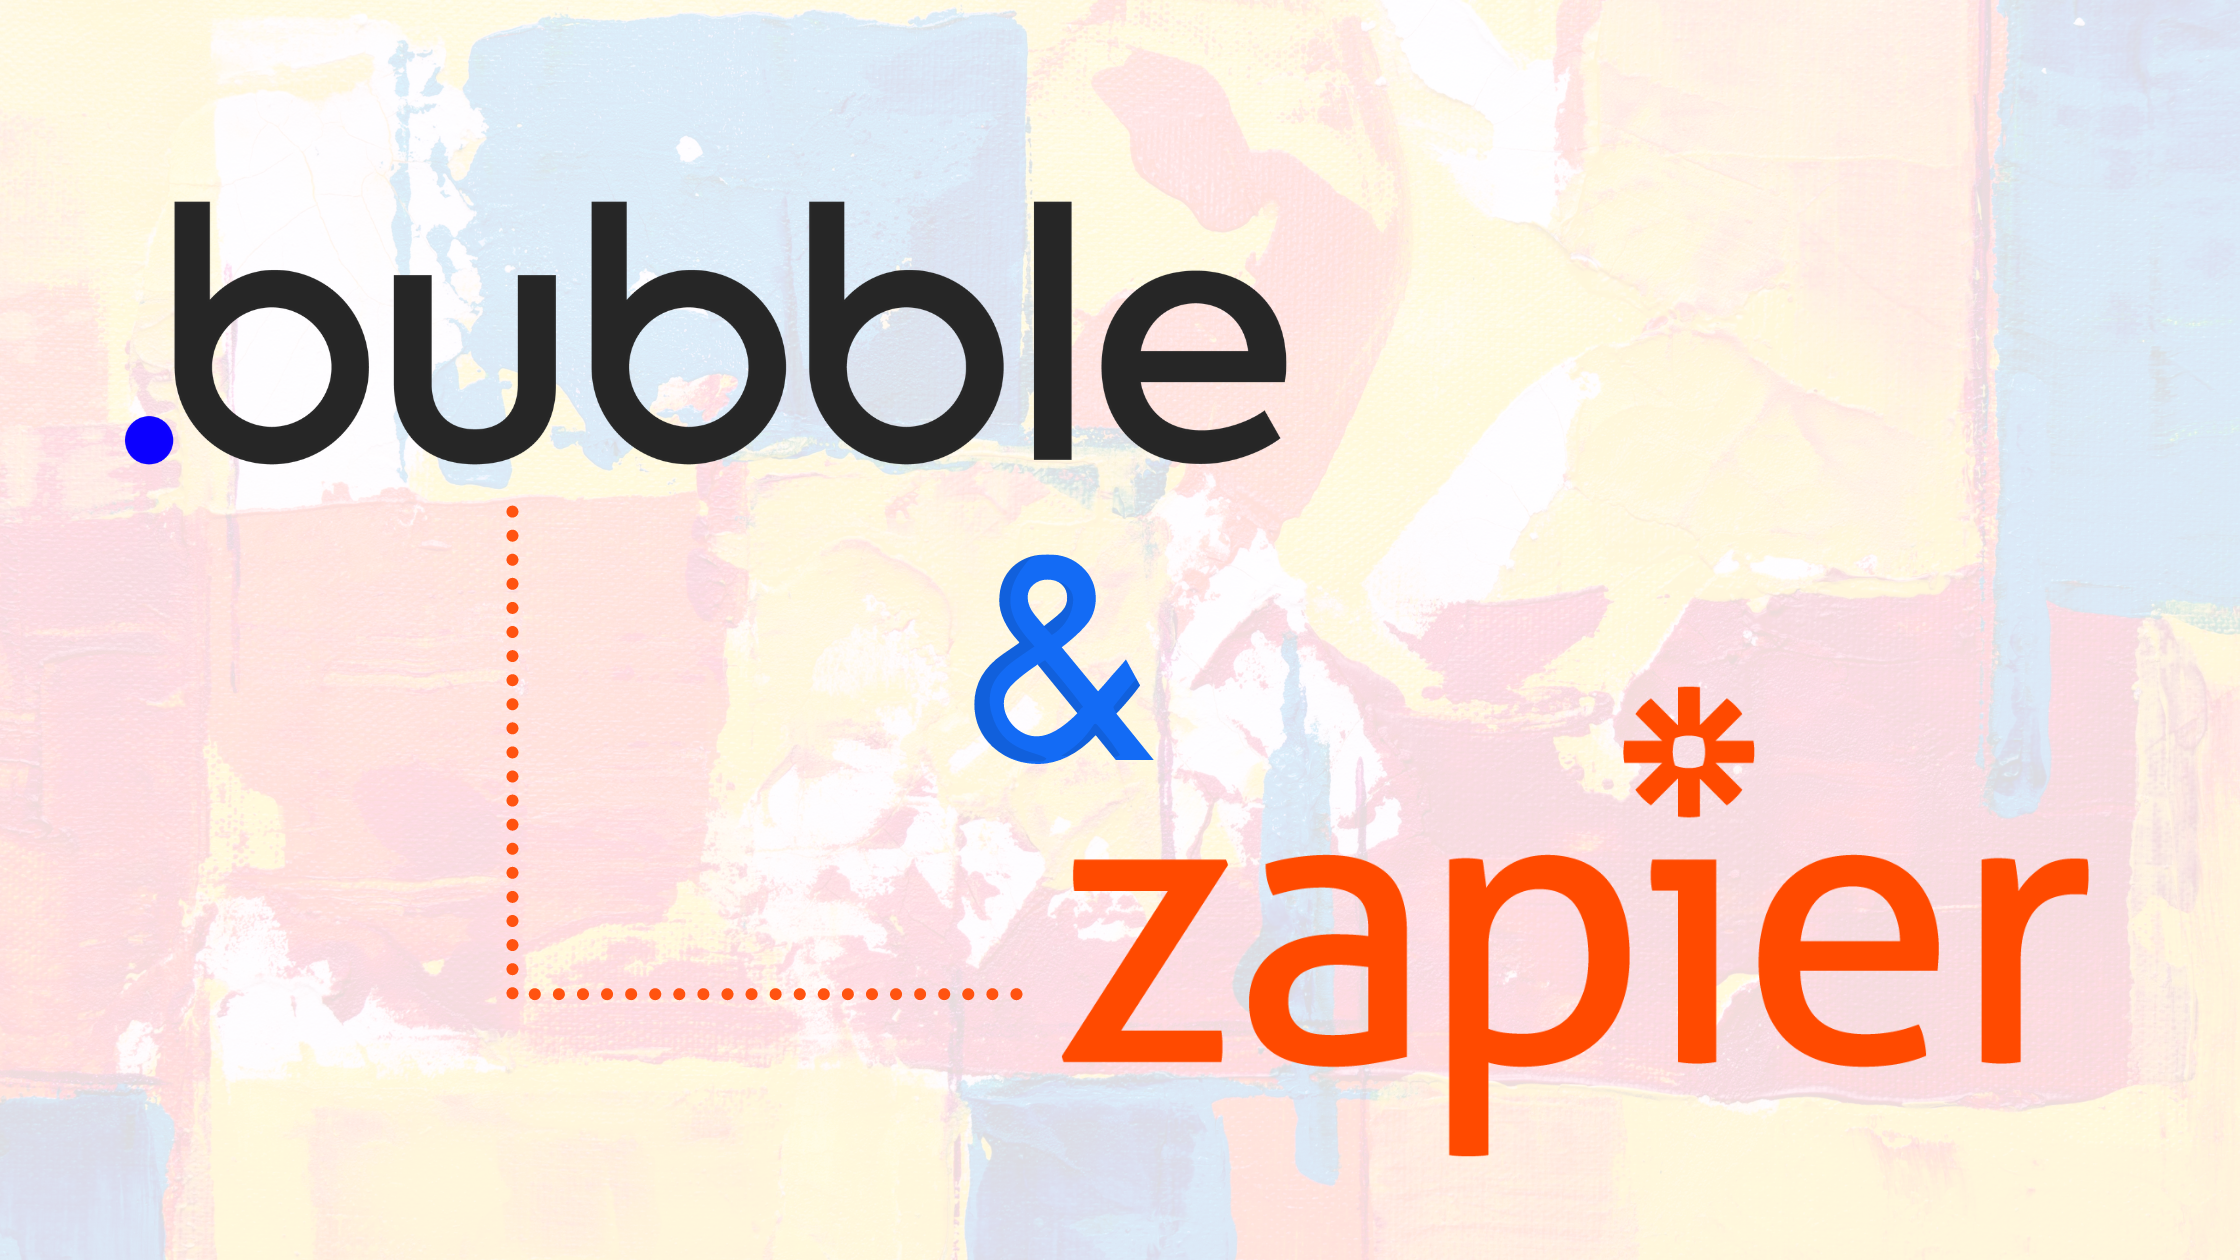 Bubble + Zapier: Connect Everything Together With No Code